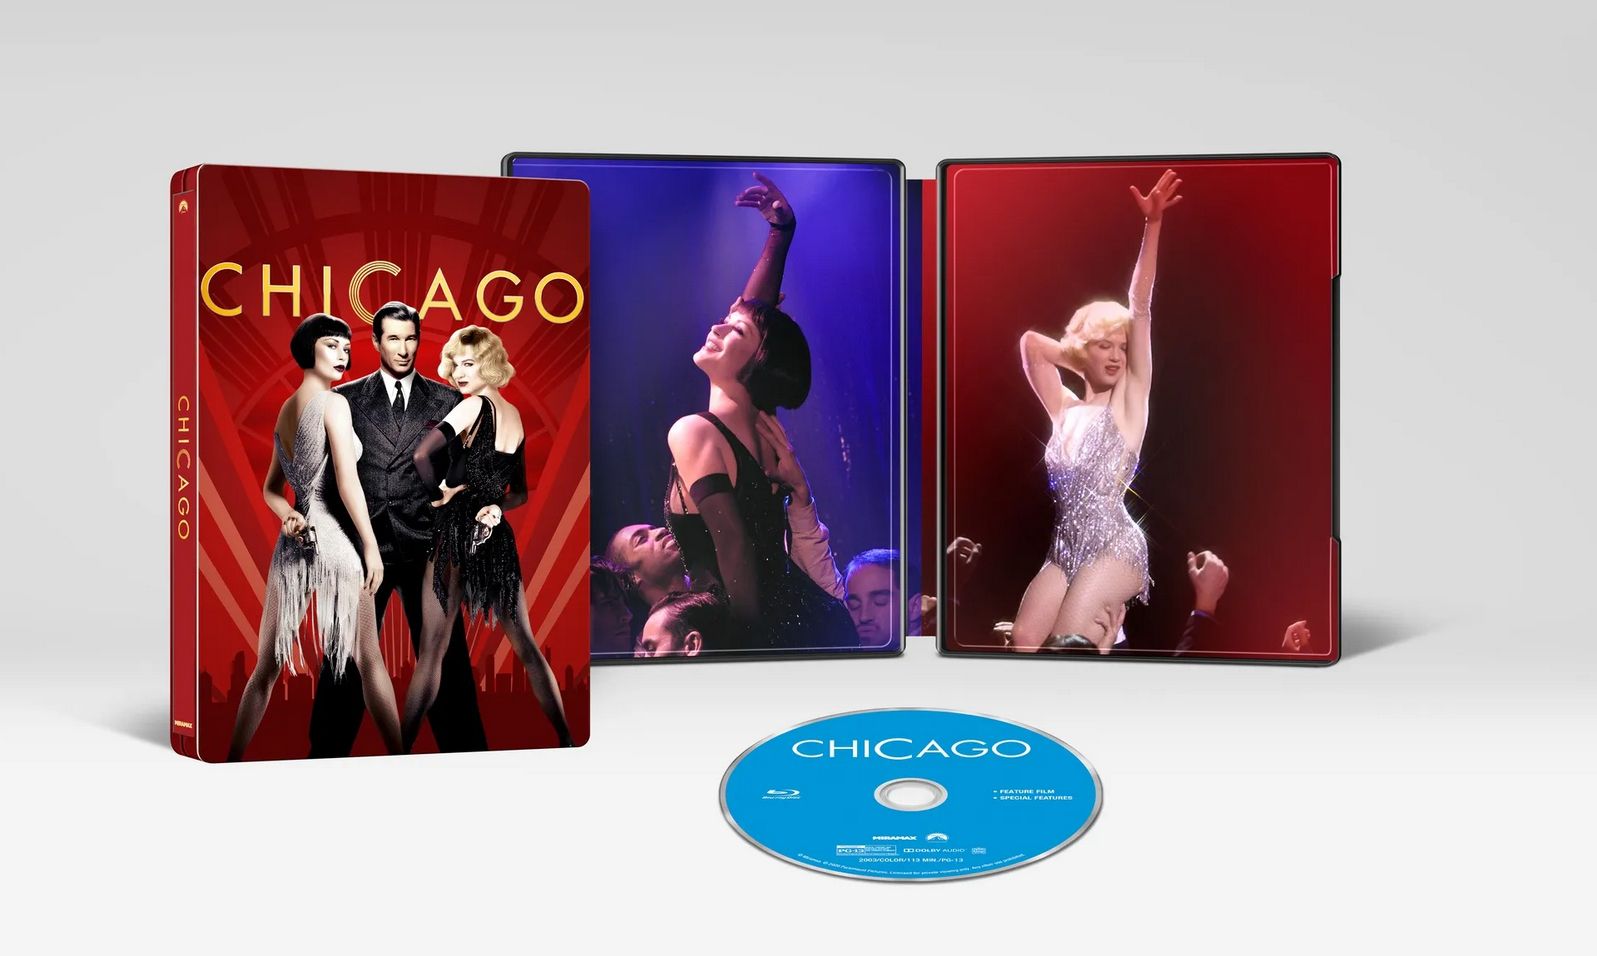 Chicago’s 20th Anniversary Limited-Edition Blu-ray SteelBook